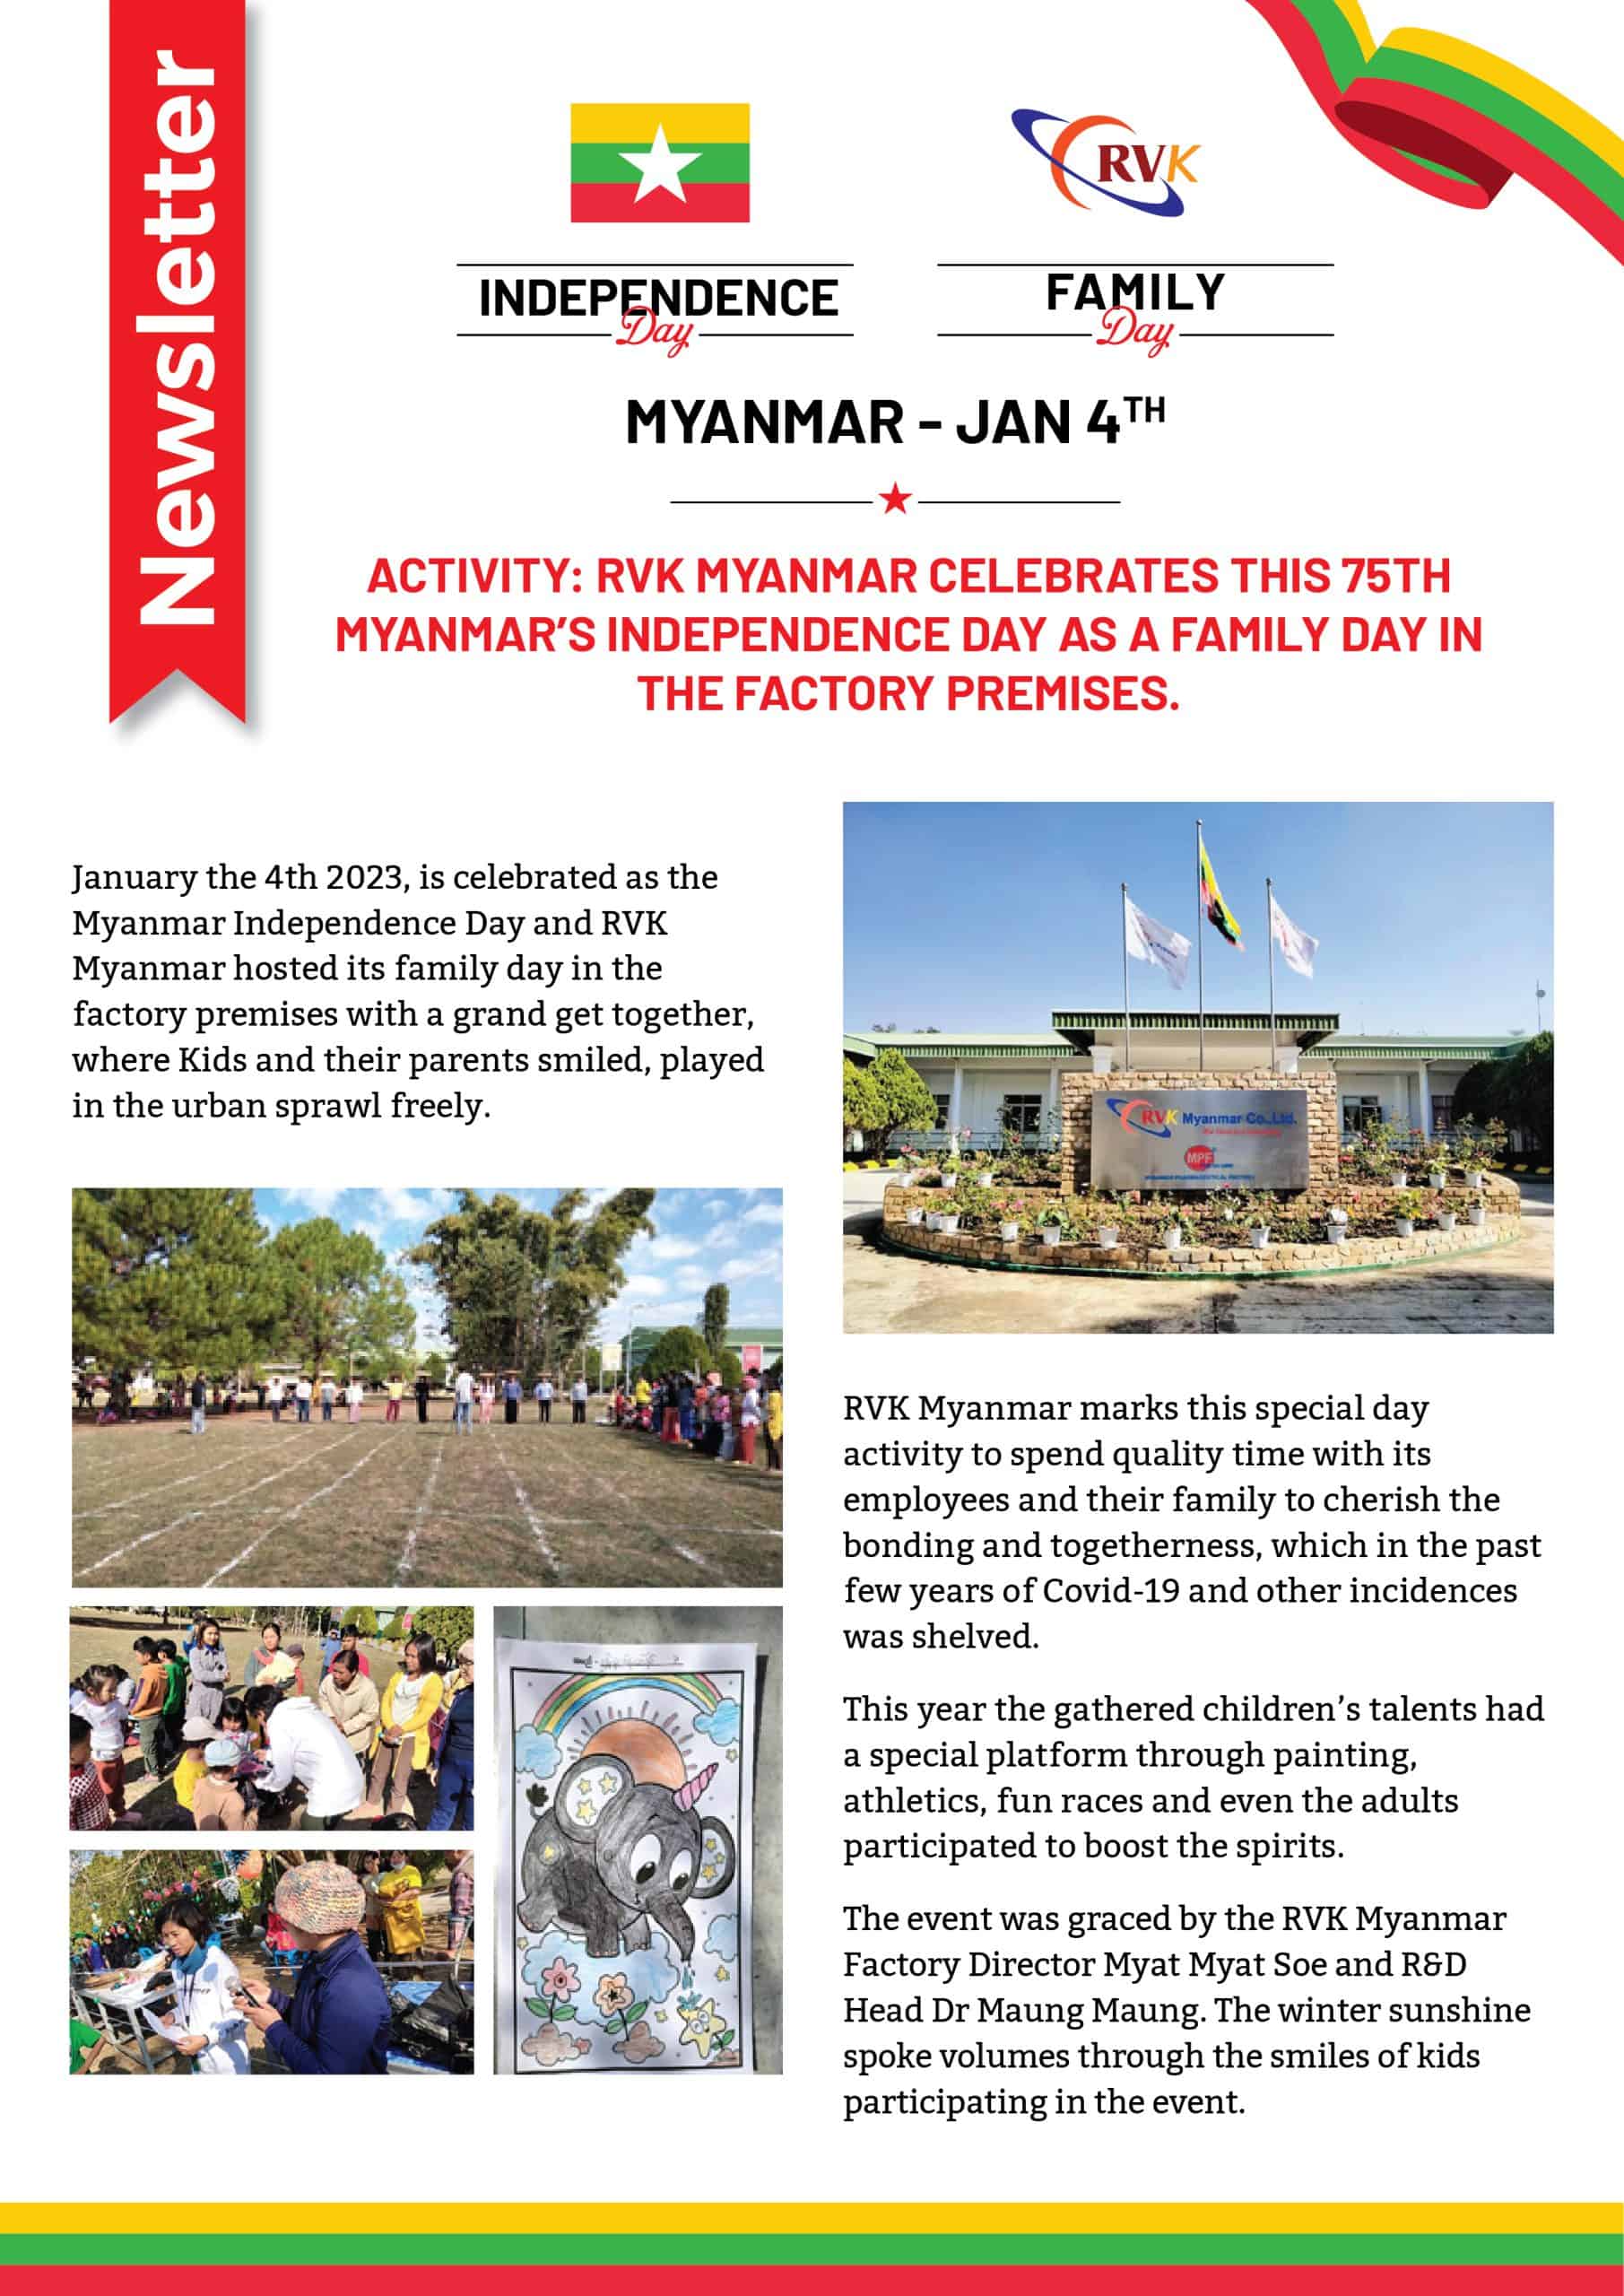 RVK MYANMAR CELEBRATES THIS 75TH MYANMAR’S INDEPENDENCE DAY AS A FAMILY DAY IN THE FACTORY PREMISES